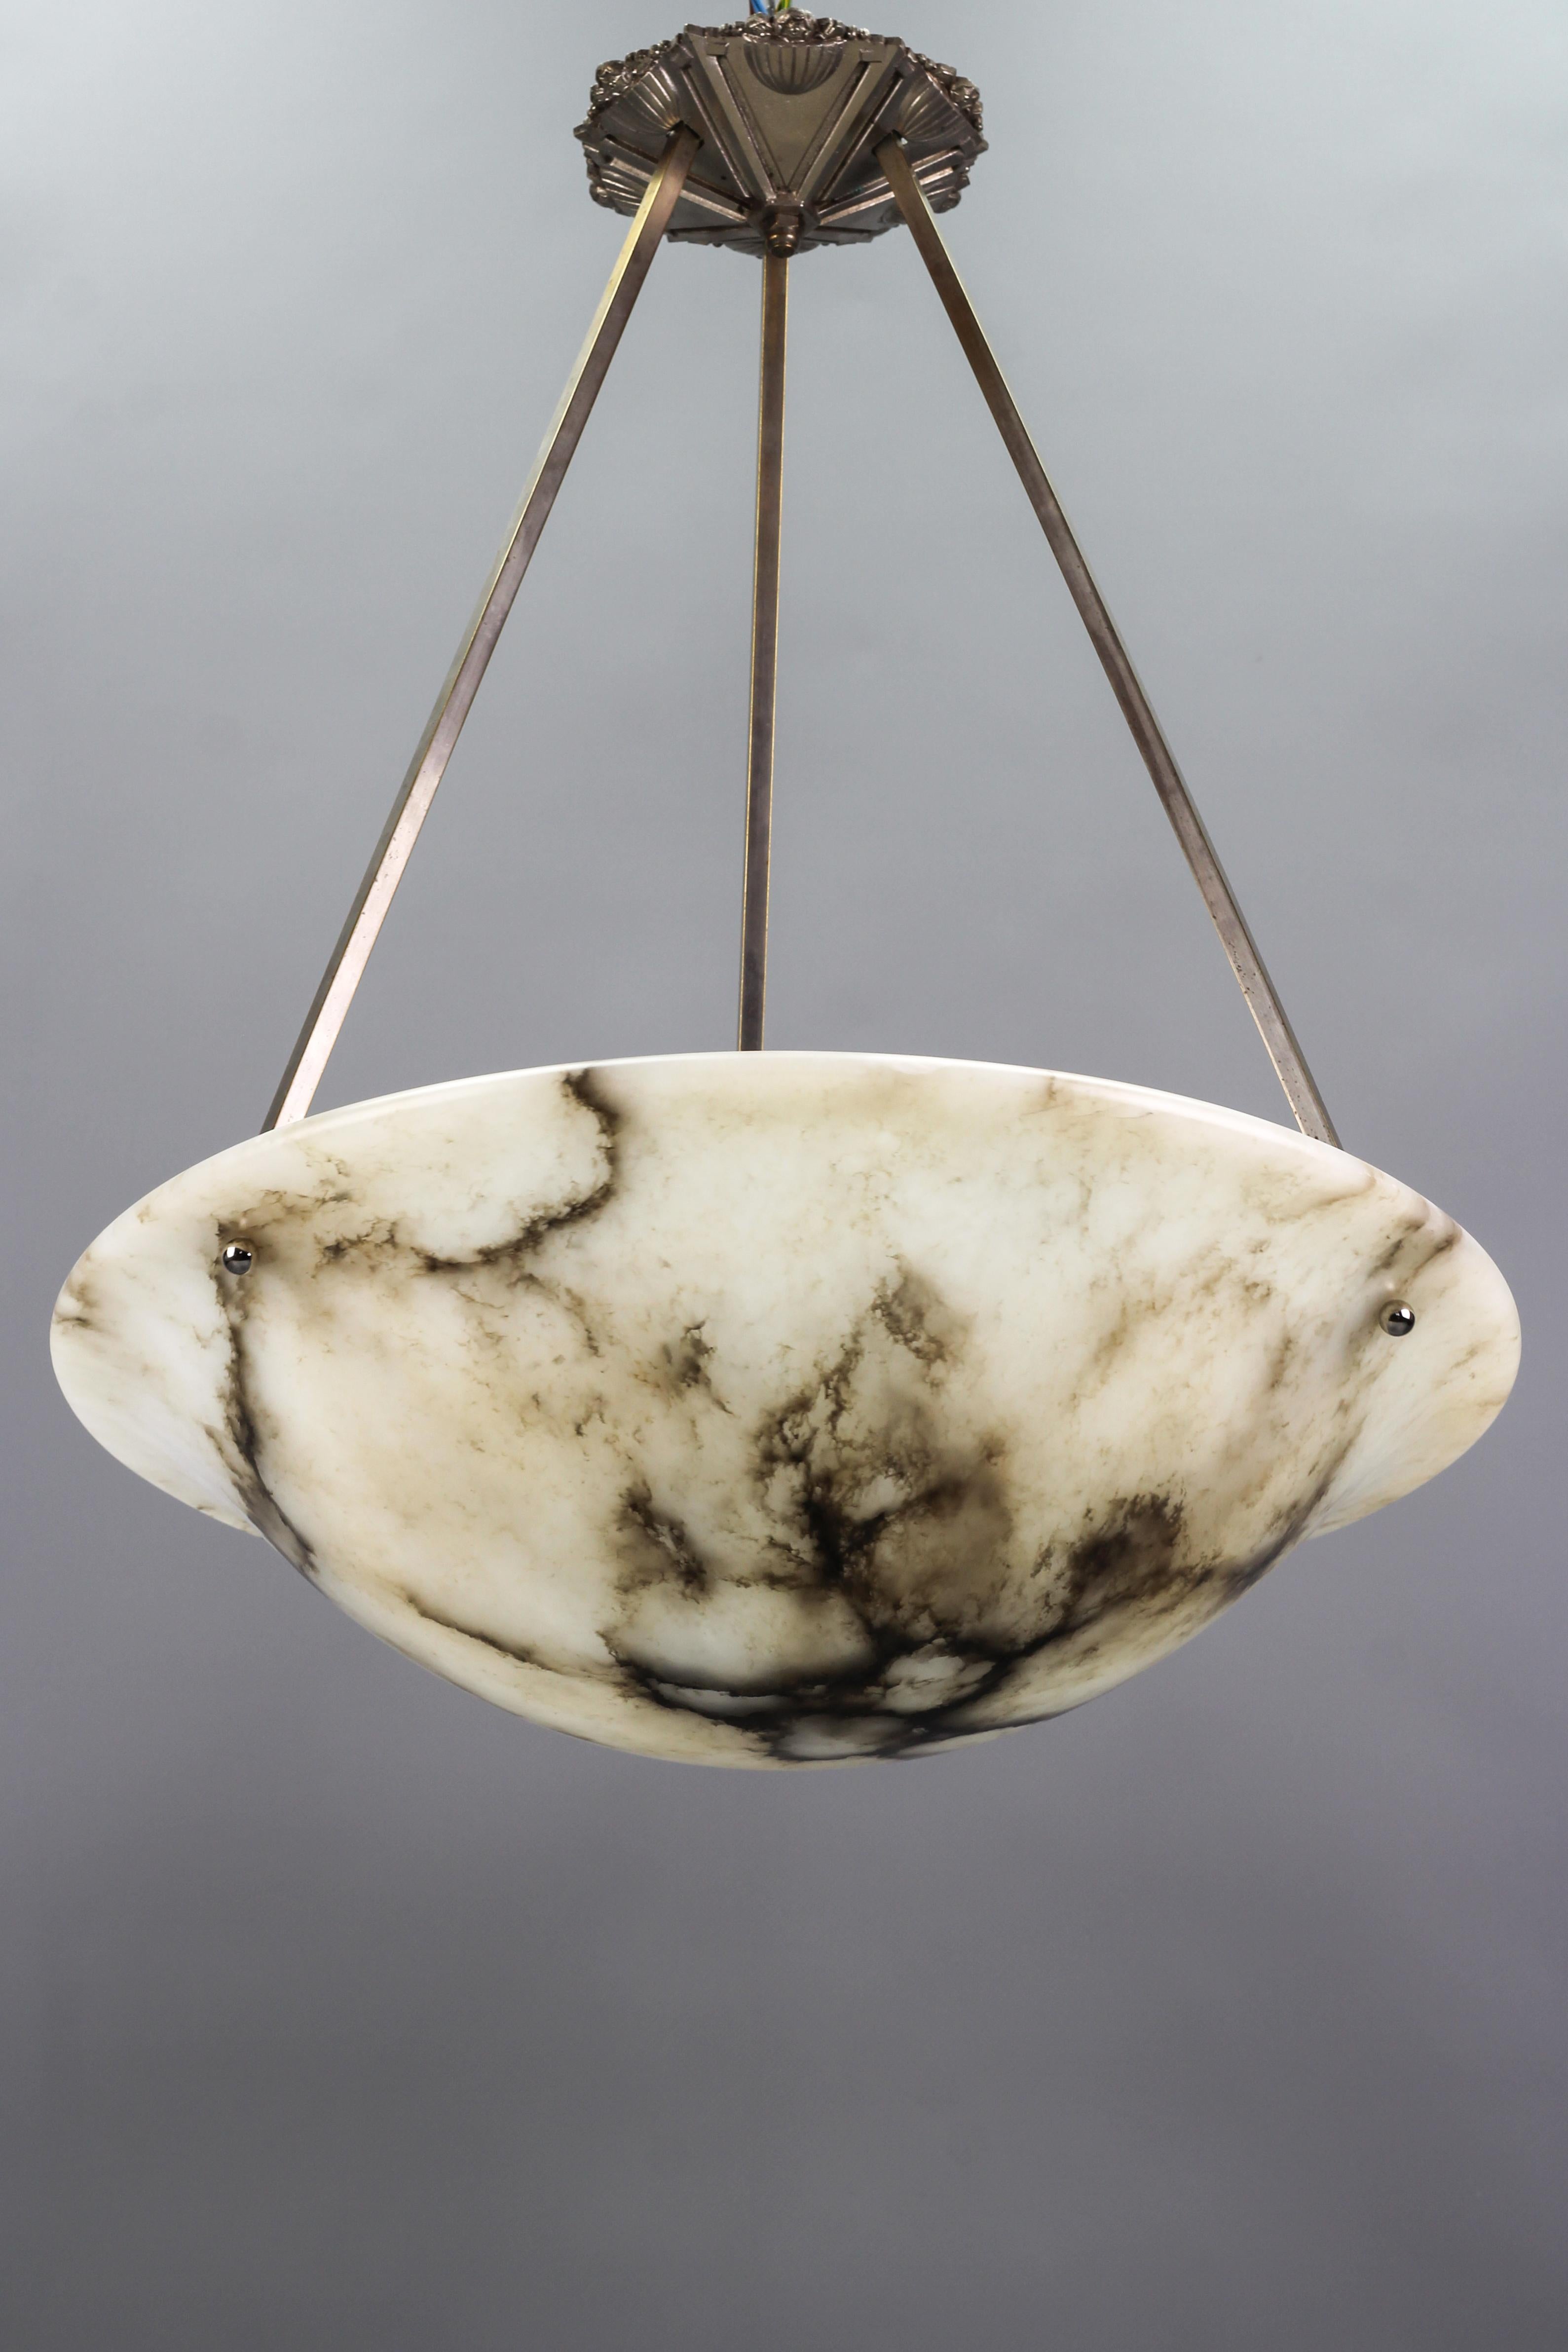 Gorgeous and large Art Deco period alabaster pendant ceiling light fixture. France, 1920s. Beautifully veined and masterfully carved one-piece white alabaster bowl suspended by chromed brass frame with three branches and an ornate Art Deco style